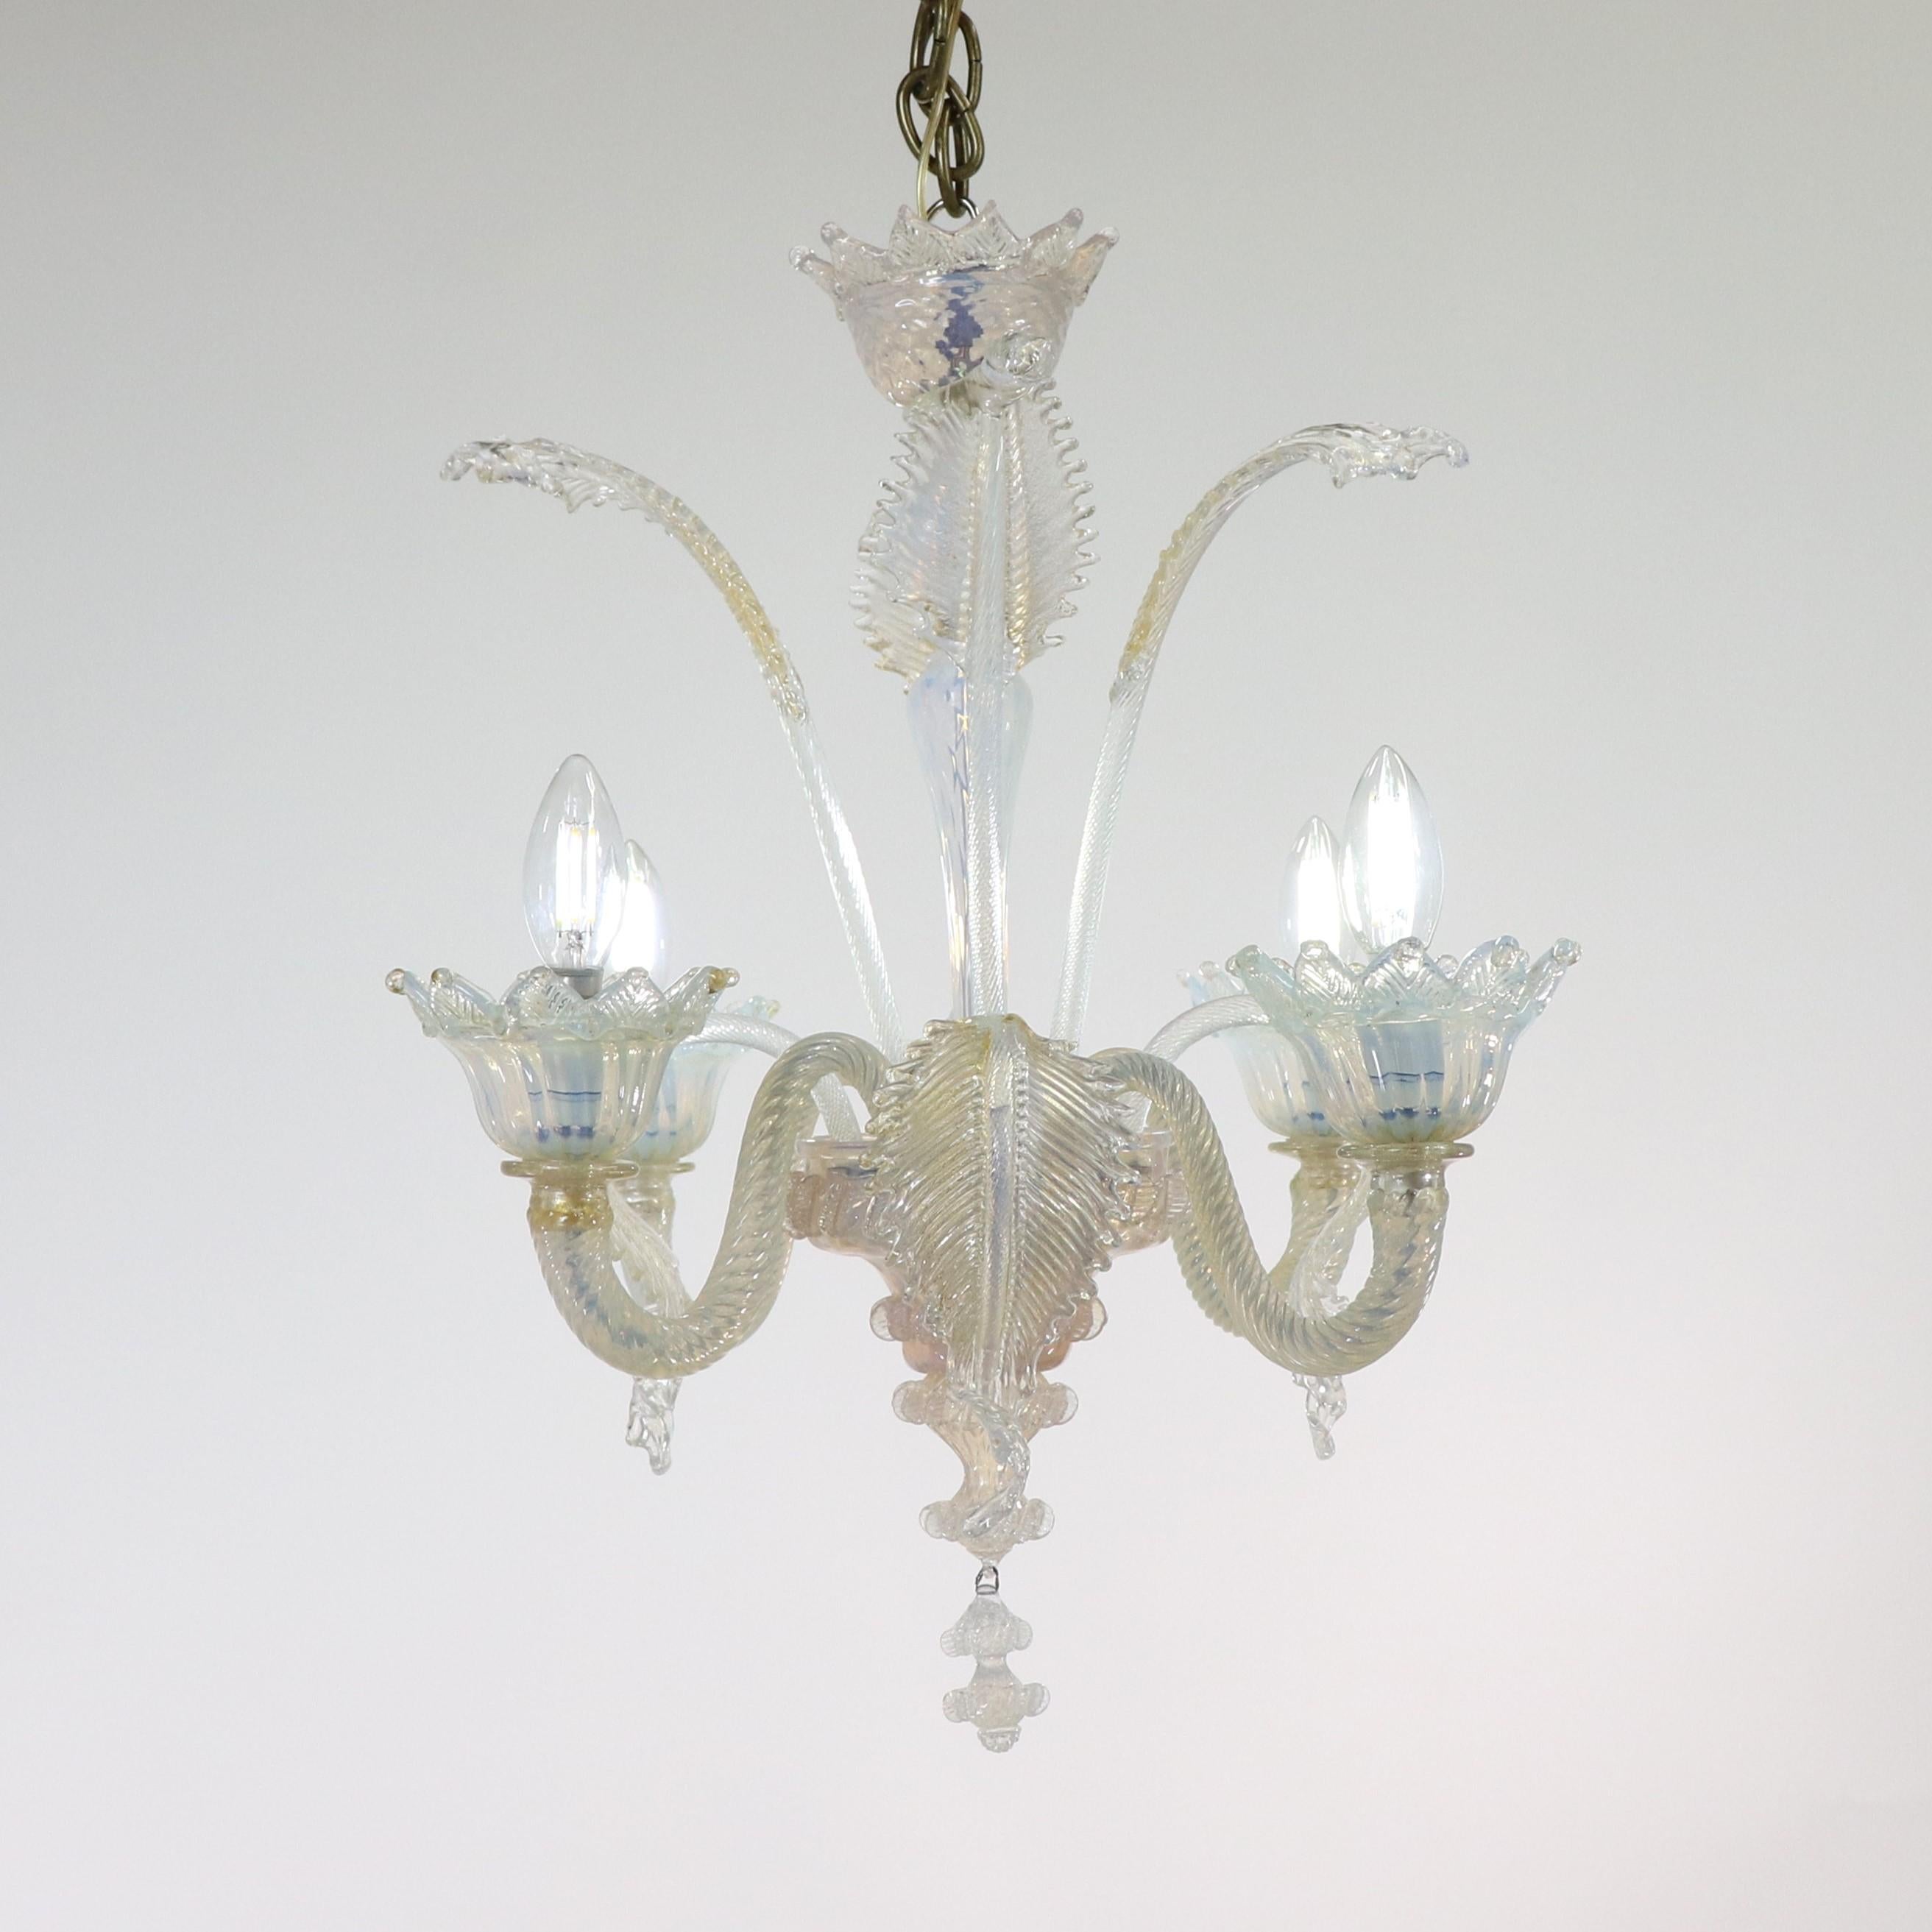 This gorgeous handcrafted gold-infused opaline Murano chandelier demonstrates a delicate Baroque-style design still loved by many. This piece has four flexing arms holding bobeches with petal-shaped trim. The milky opaline glass veers towards a